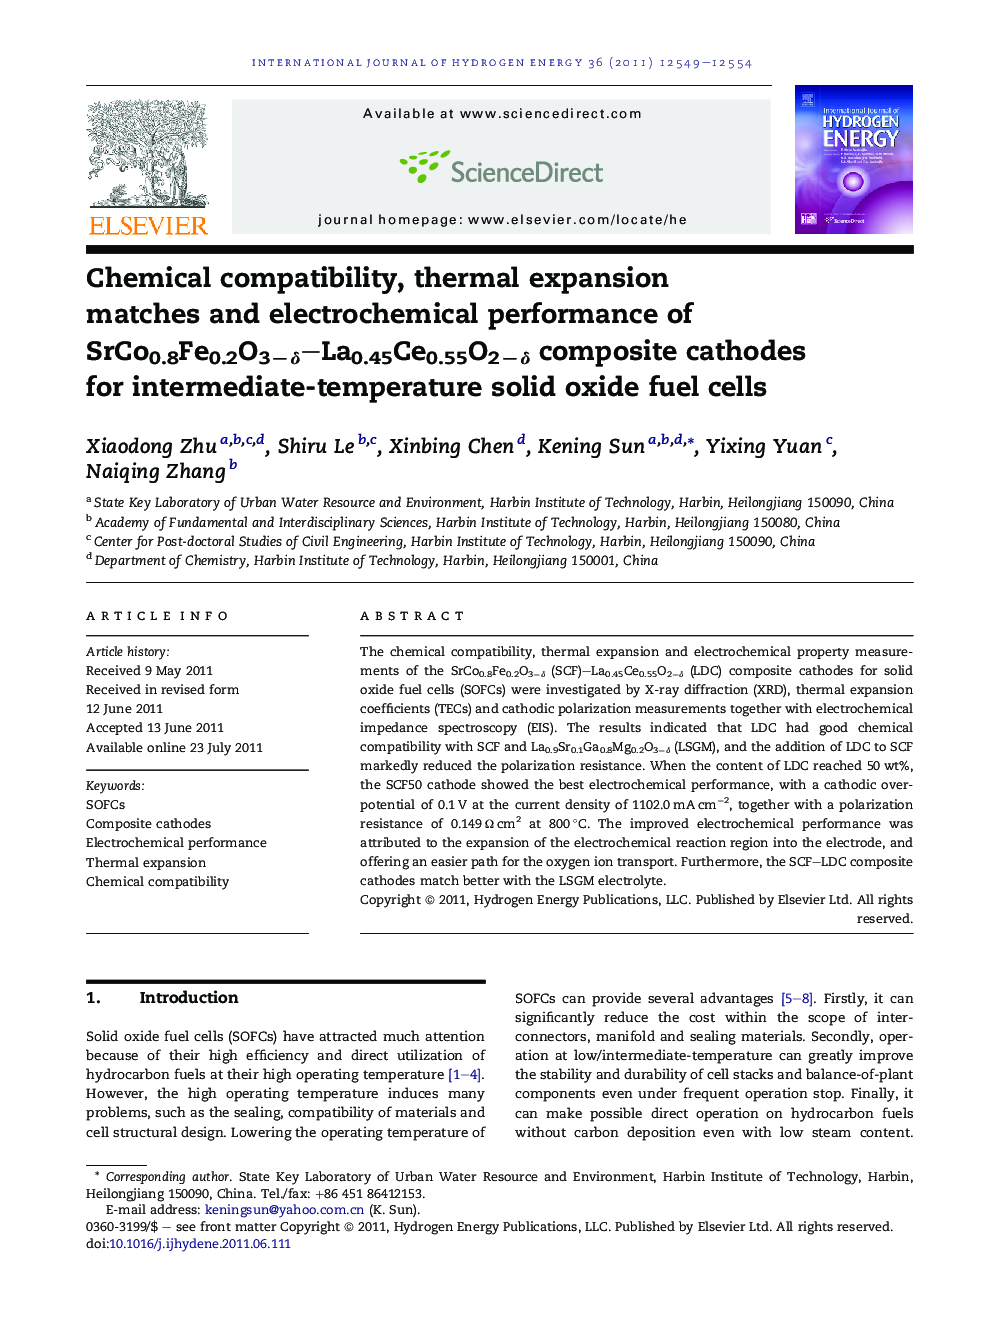 Chemical compatibility, thermal expansion matches and electrochemical performance of SrCo0.8Fe0.2O3−δ–La0.45Ce0.55O2−δ composite cathodes for intermediate-temperature solid oxide fuel cells